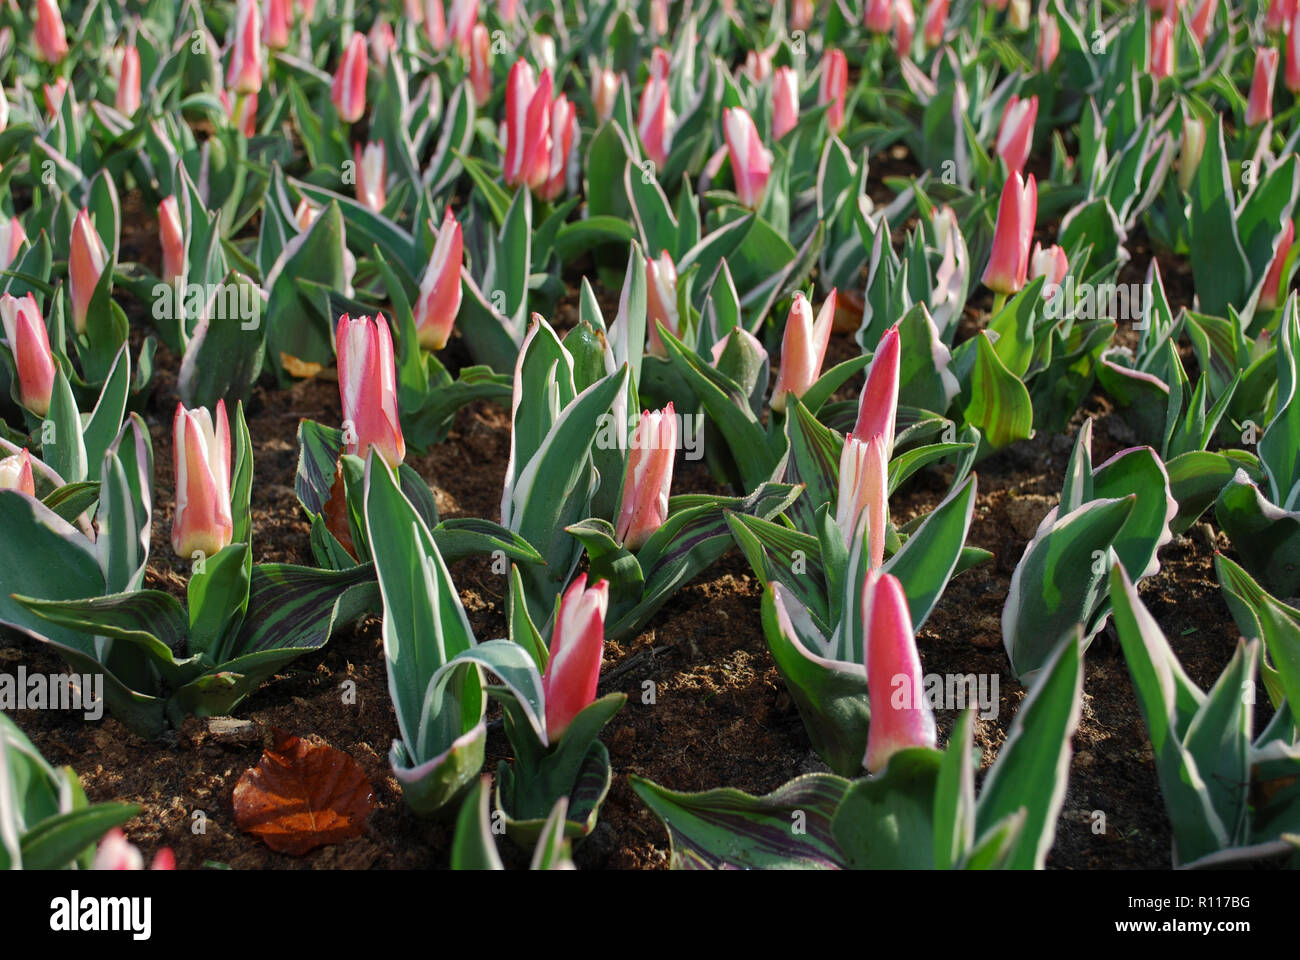 Tulipa Kaufmanniana Heart’s Delight grown in the park.  Spring time in Netherlands. Stock Photo